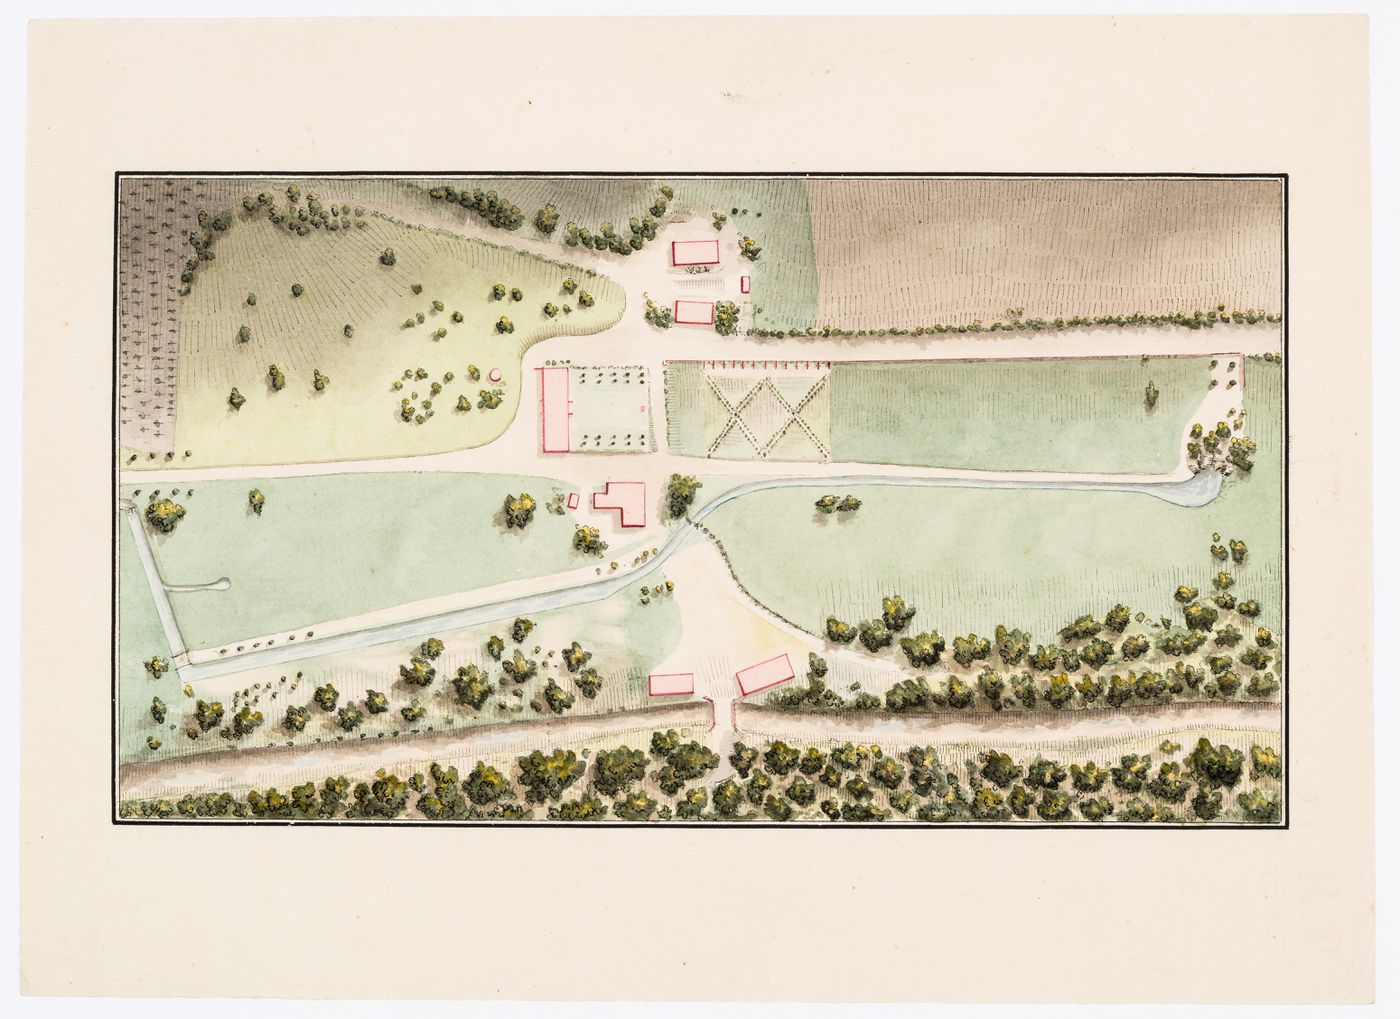 Site plan of a house with outbuildings including a bird's-eye view of the surrounding landscape